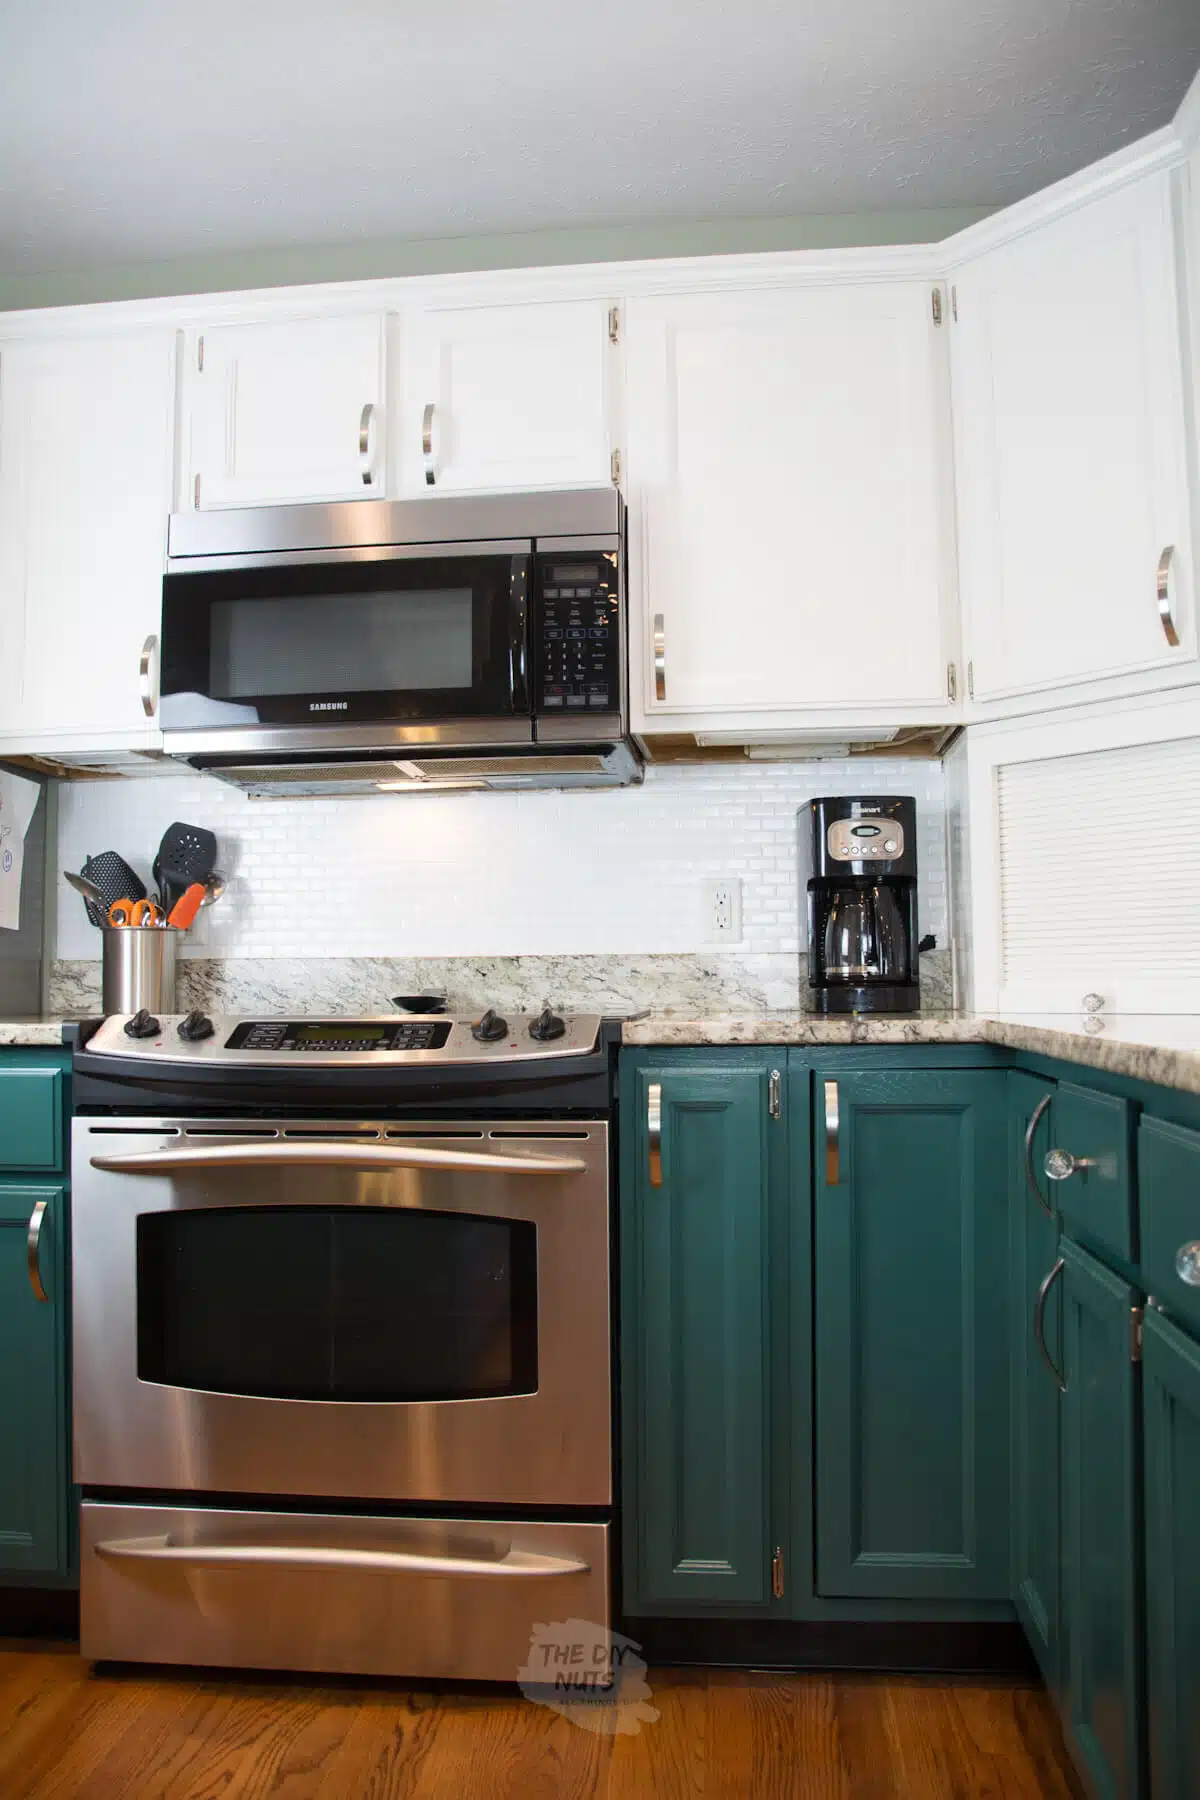 SW rookwood sash green painted lower cabinets and white upper cabinets in kitchen makeover.